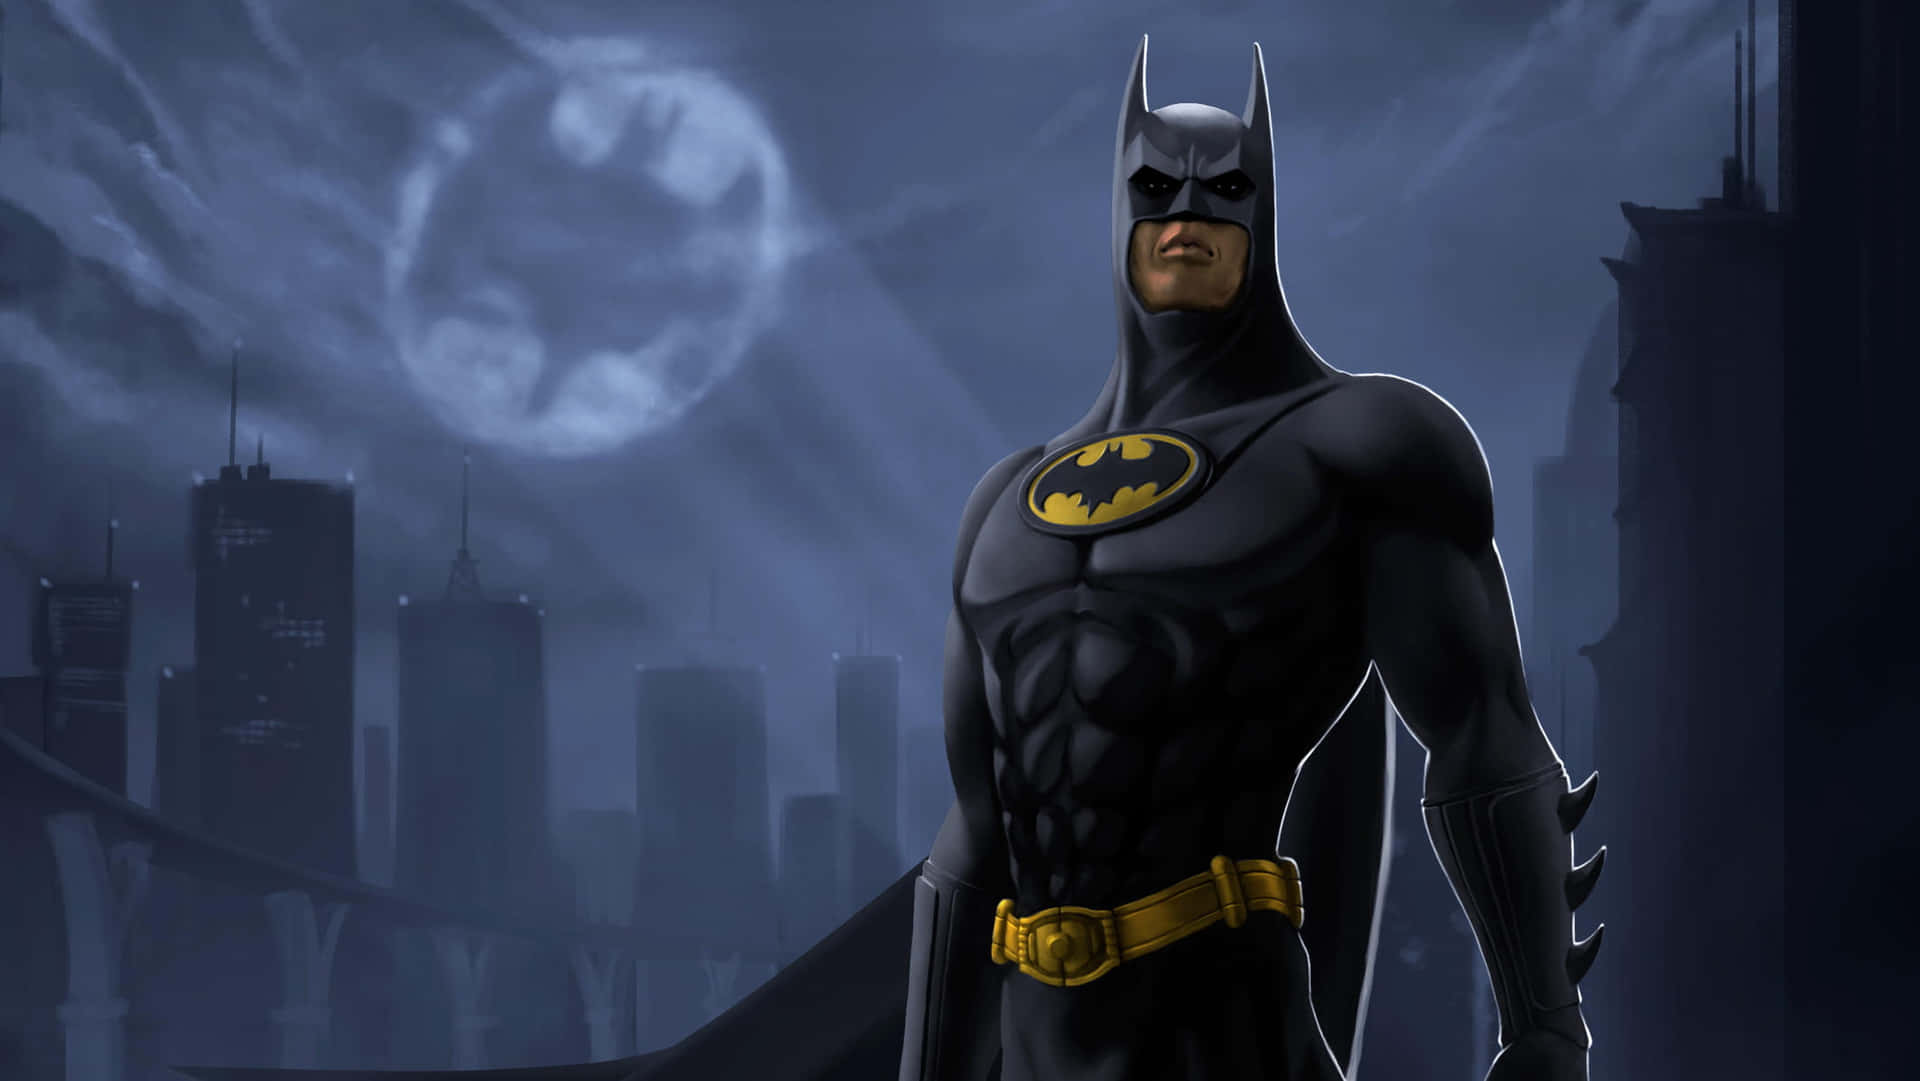 Dramatic Bat Signal Shines Bright In The Night Sky Background